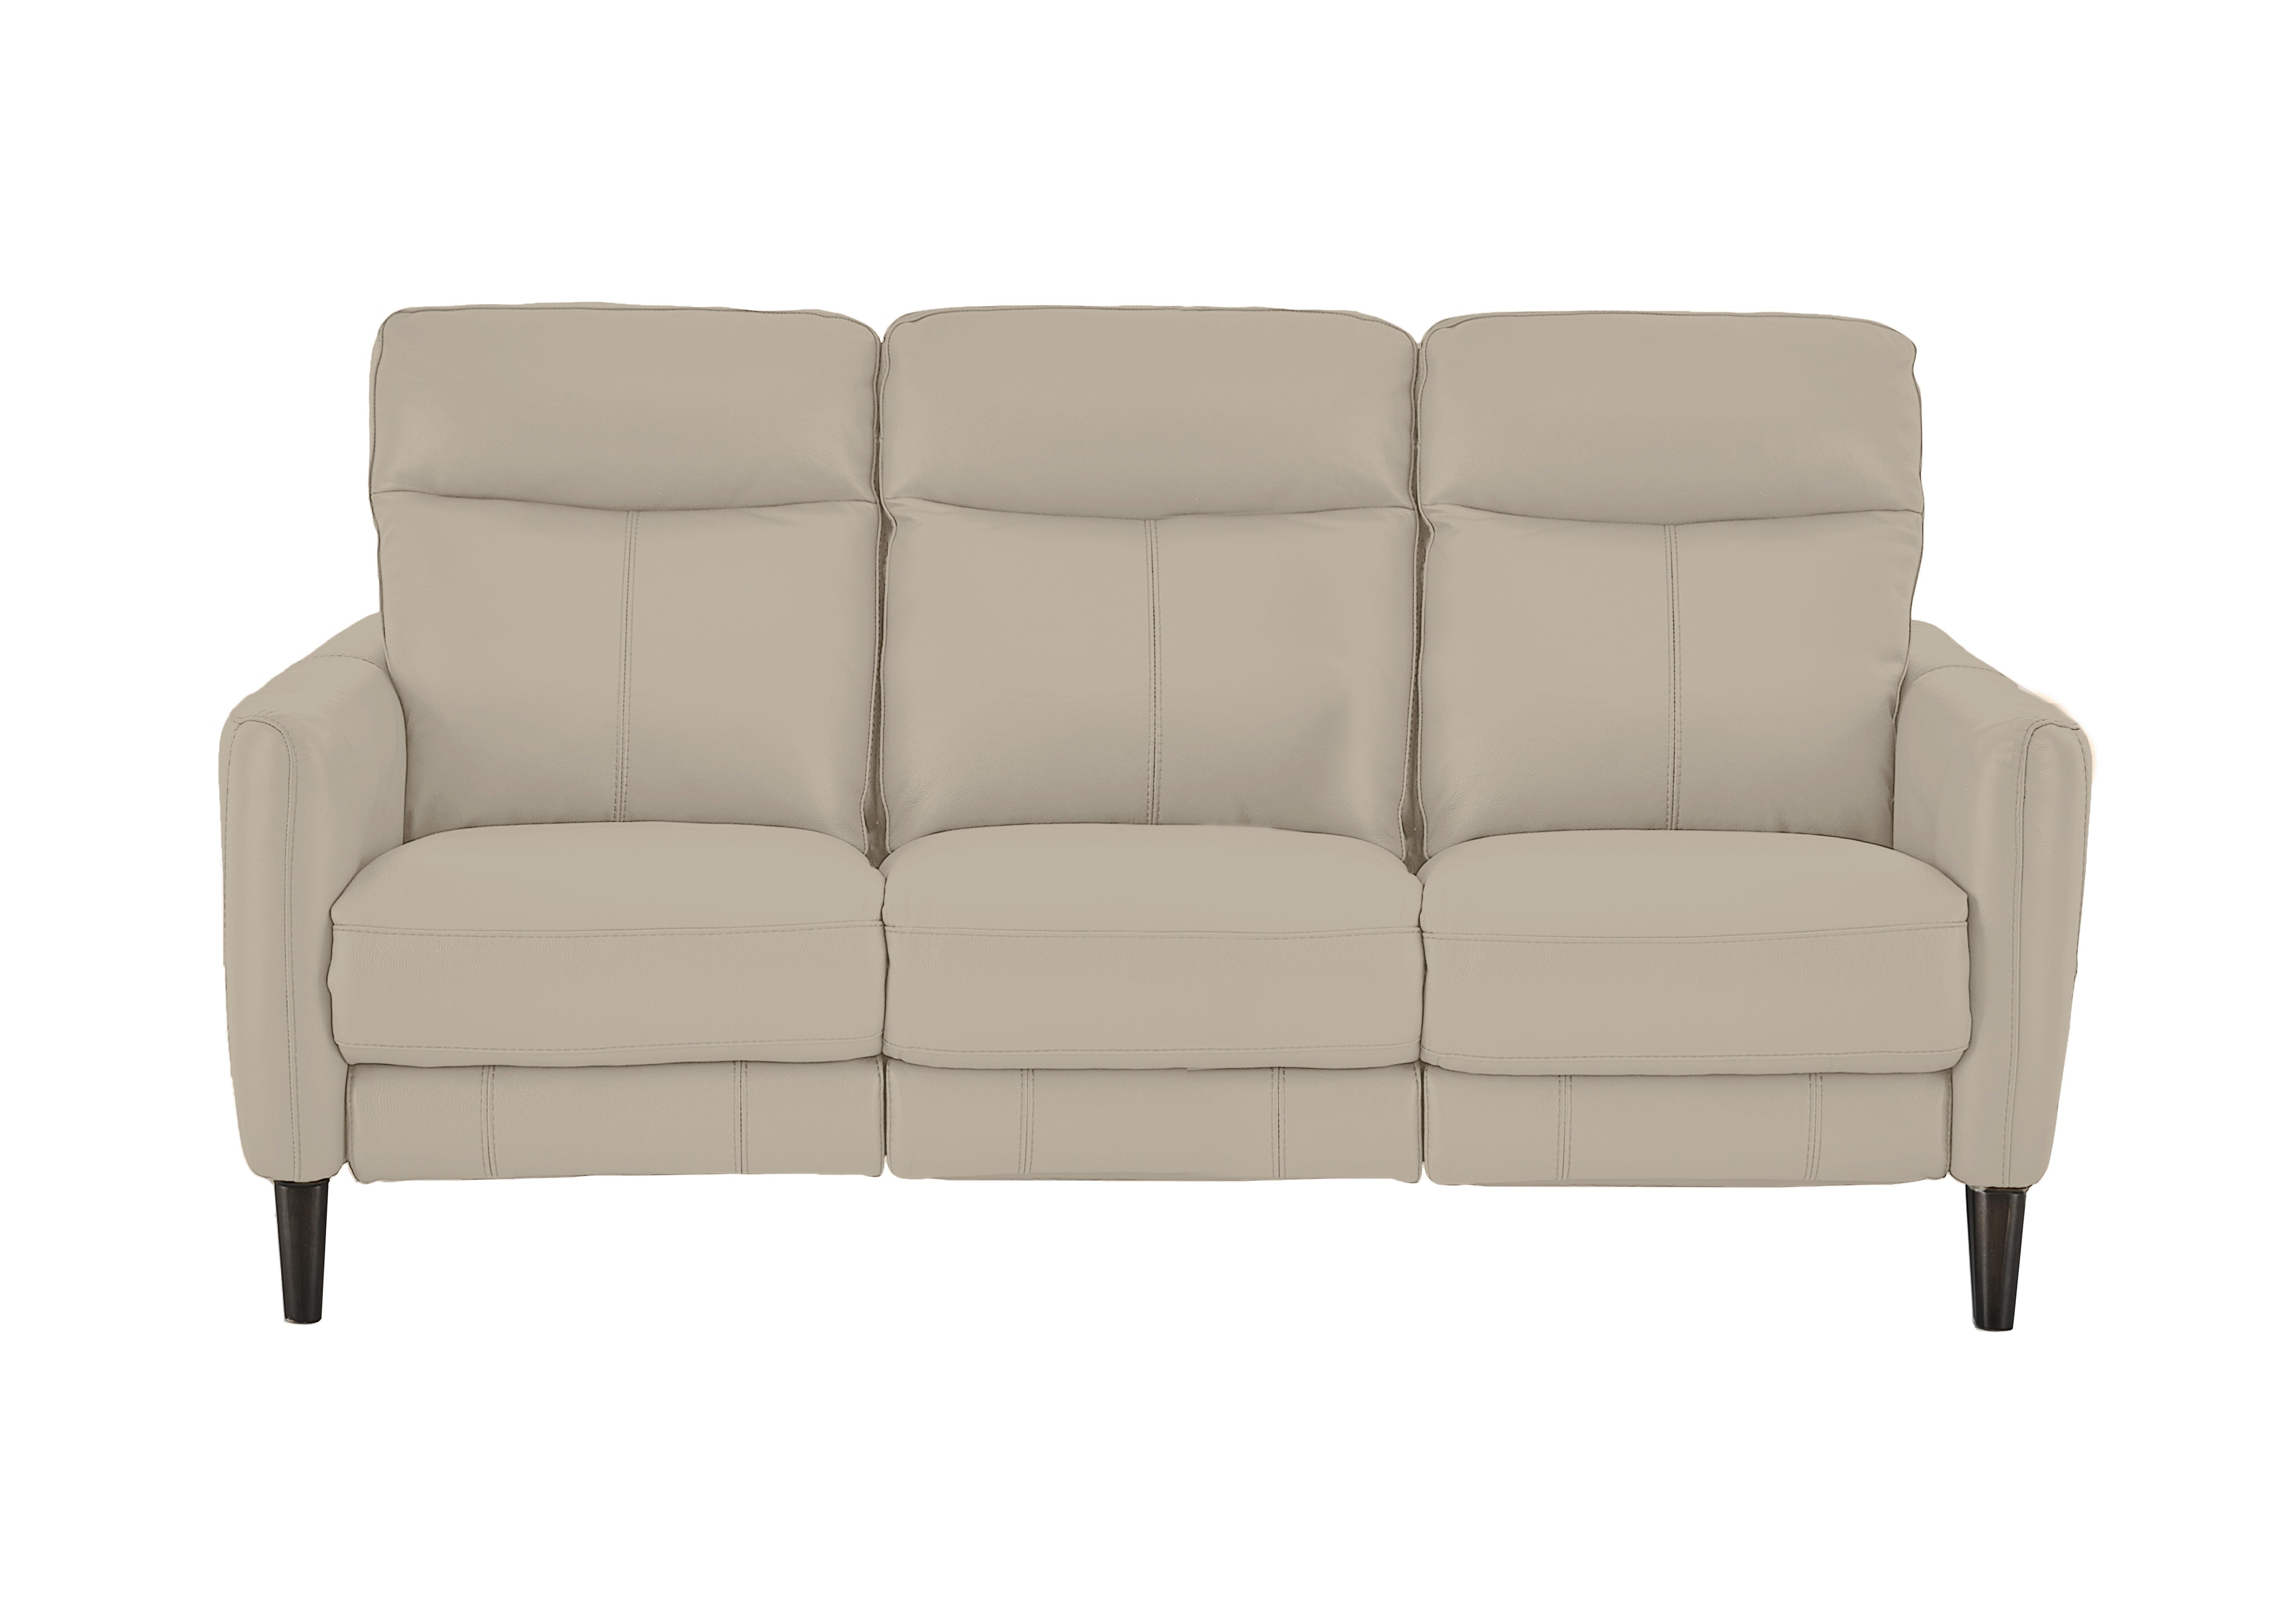 Compact Collection Petit 3 Seater Leather Sofa in Bv-041e Dapple Grey on Furniture Village